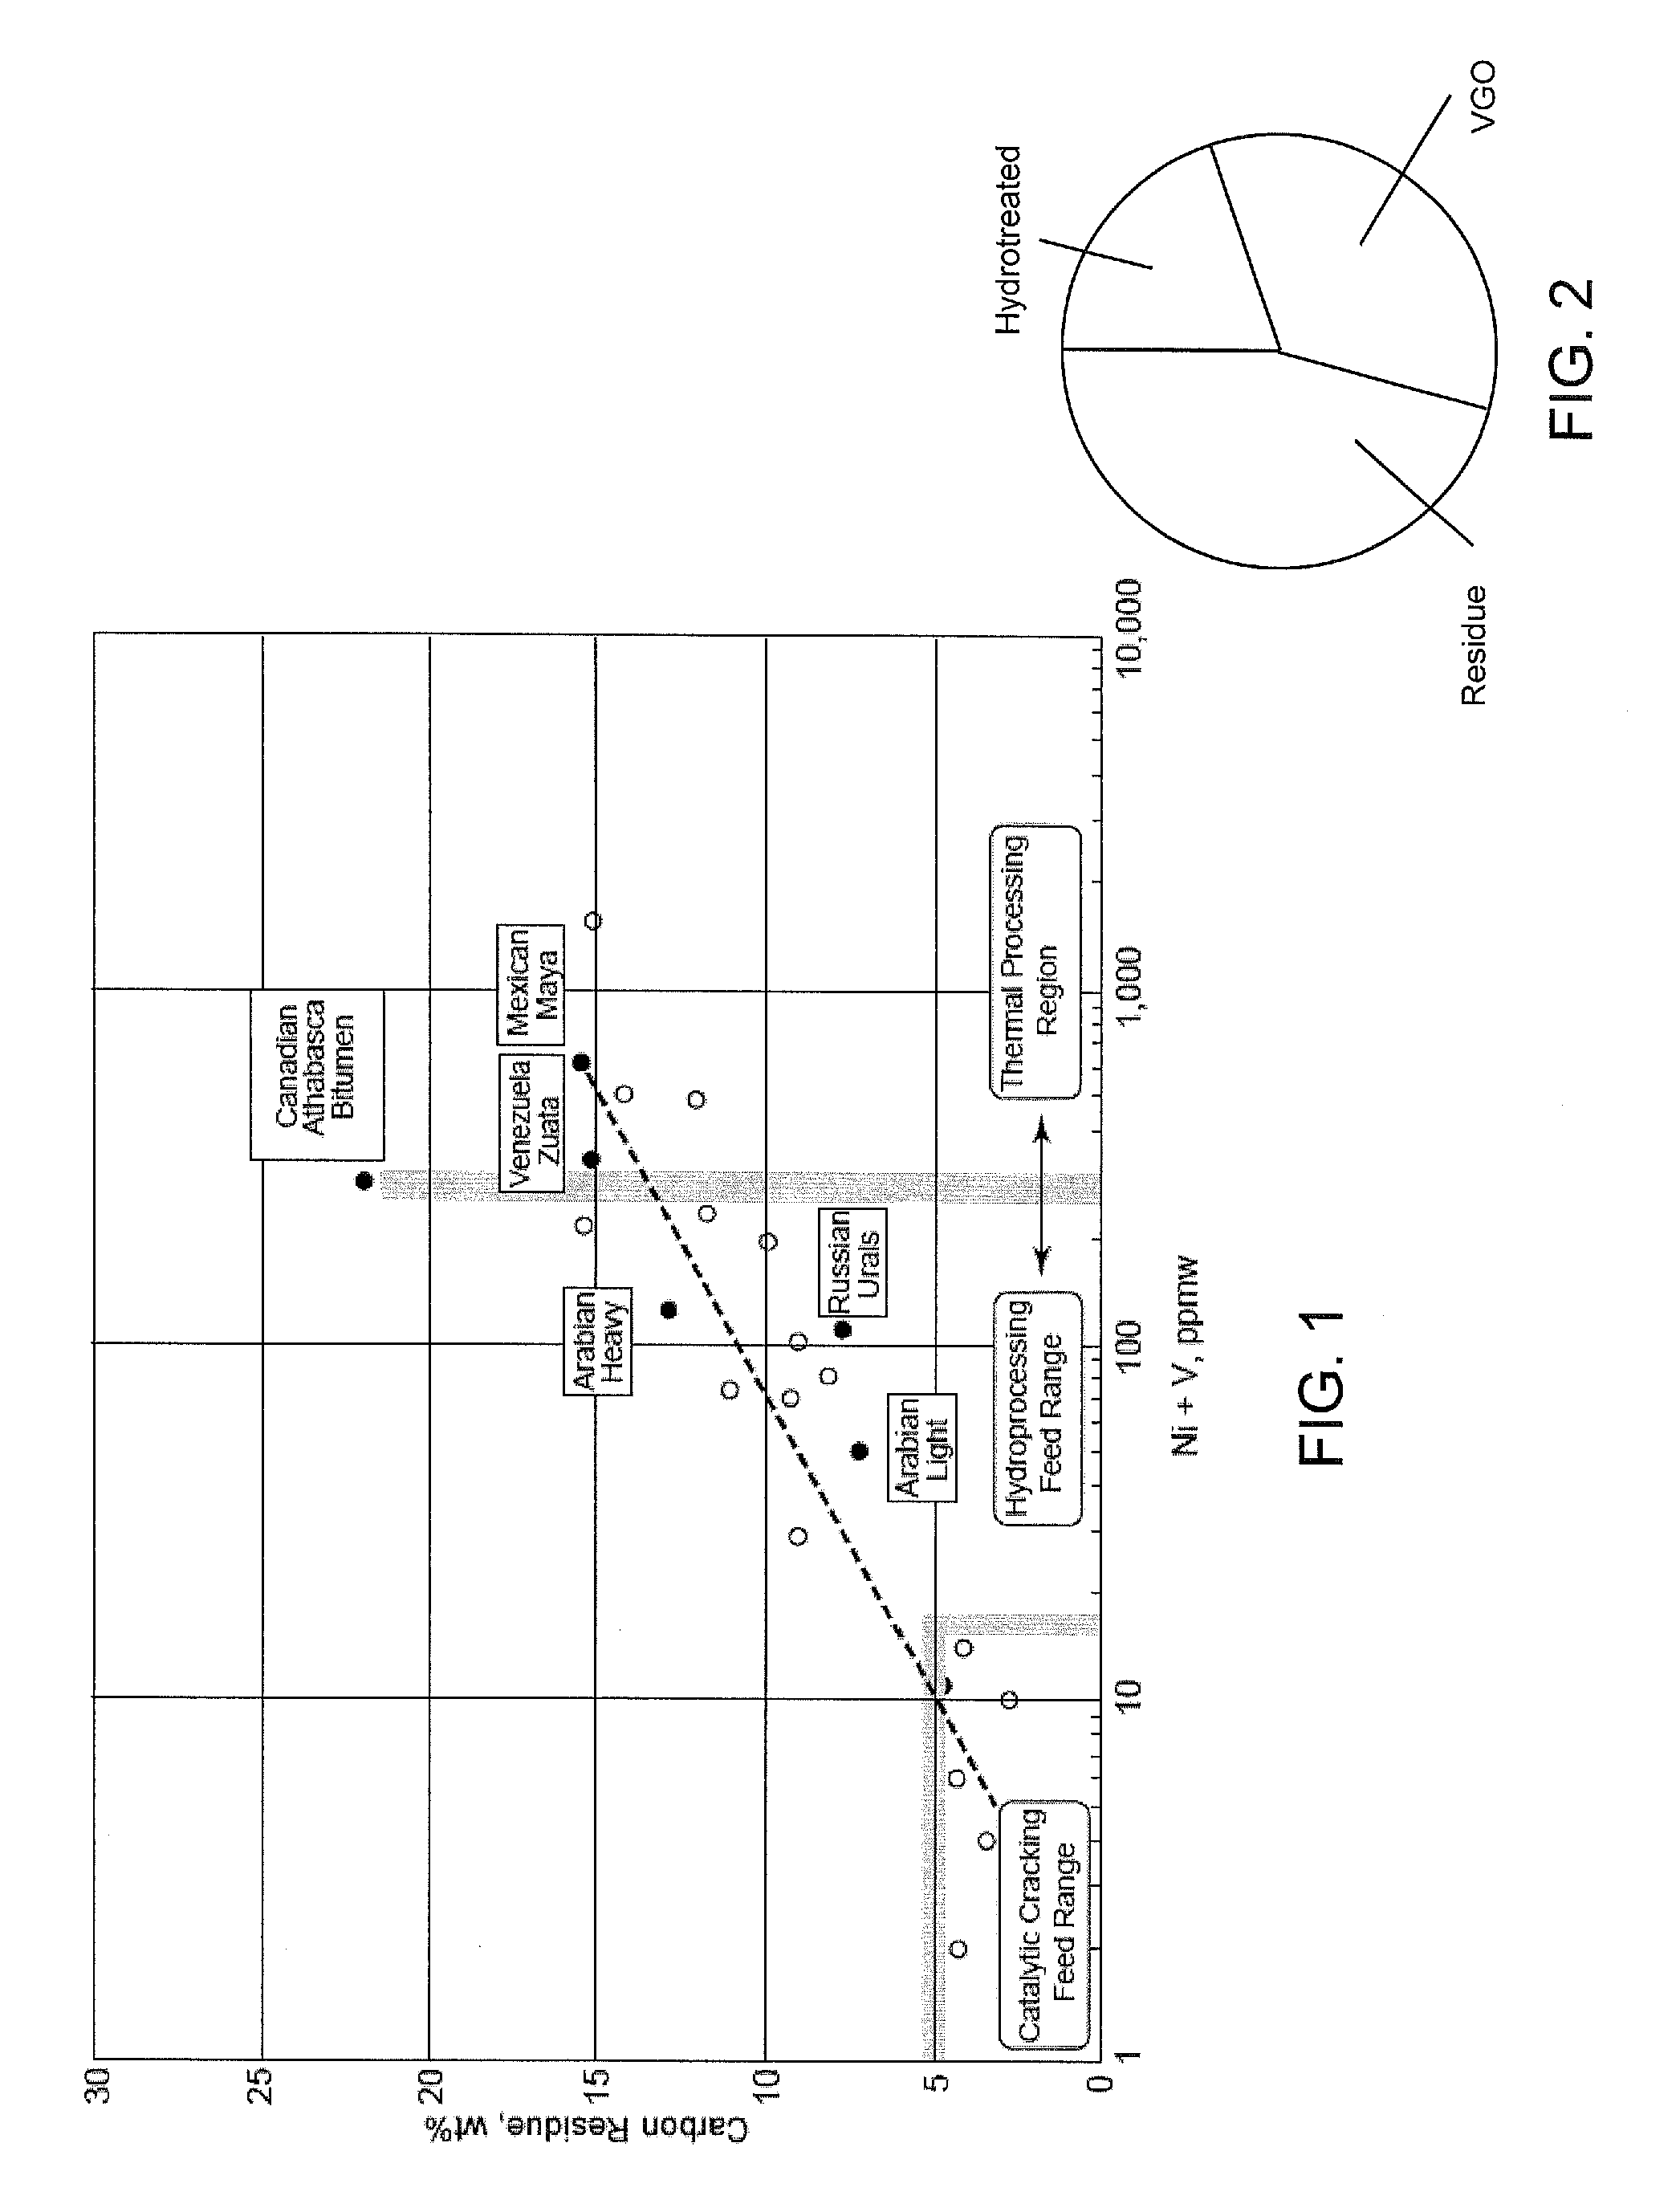 Process for high severity catalytic cracking of crude oil